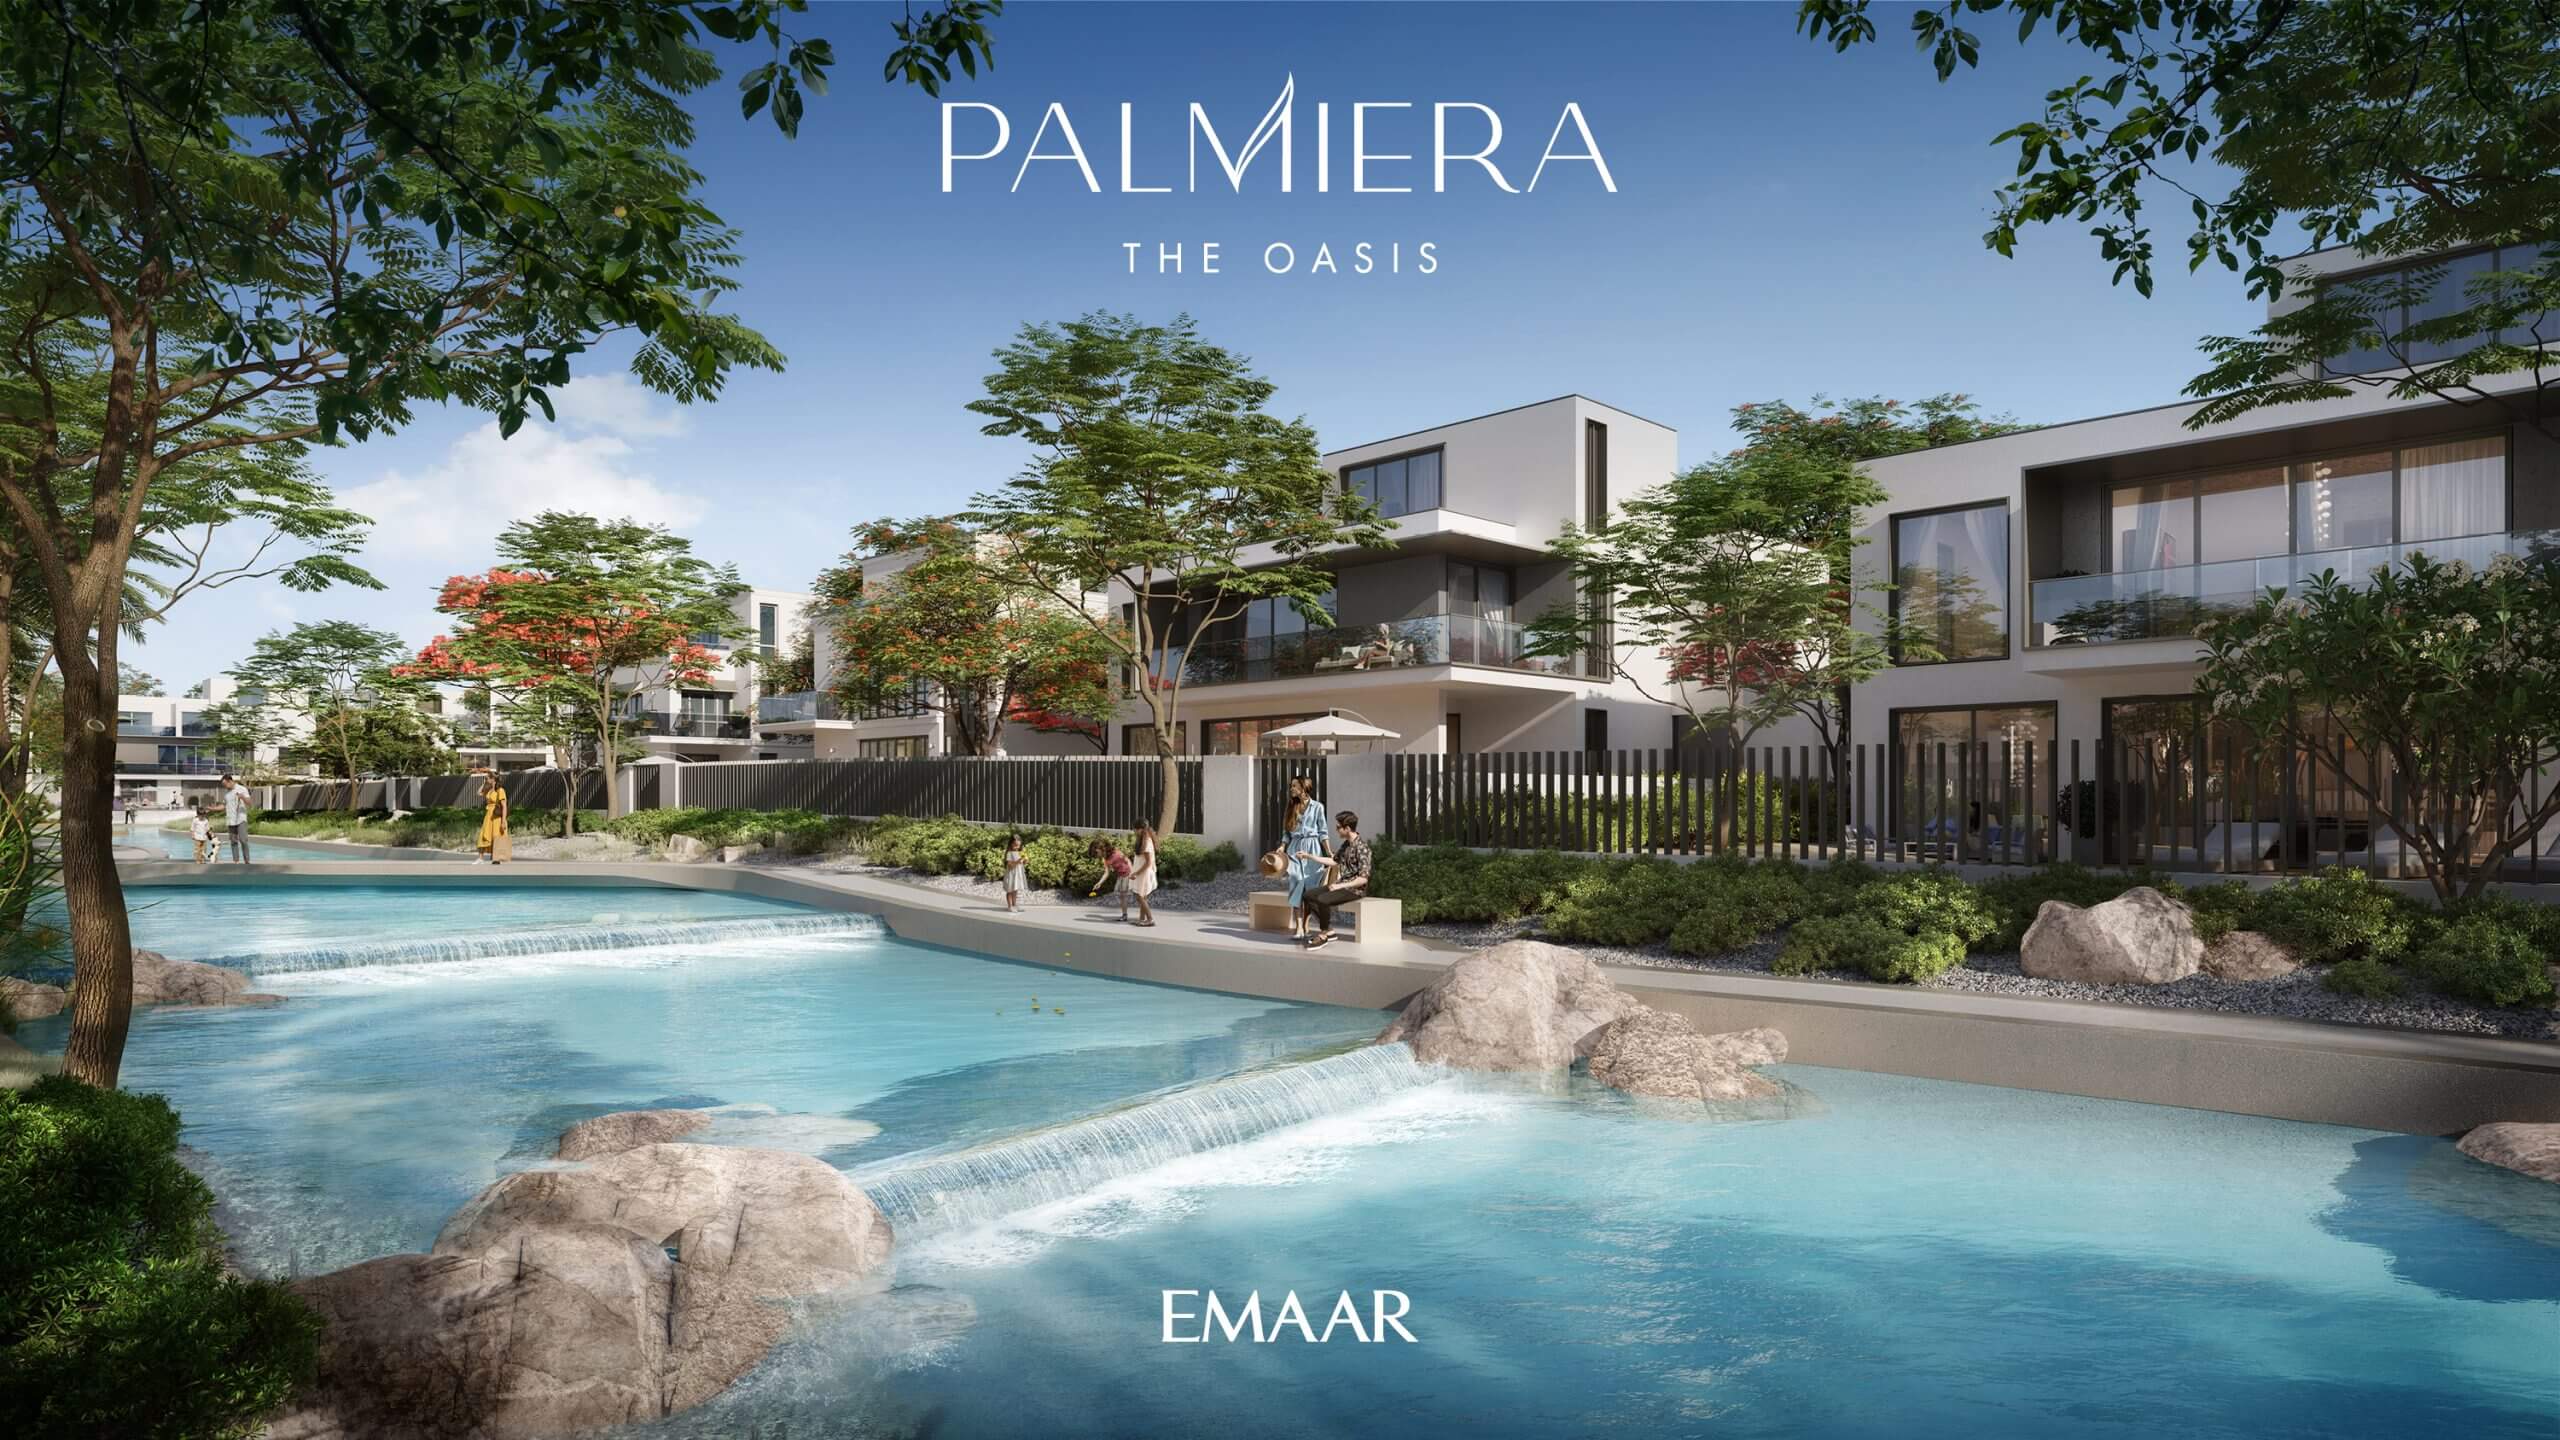 PALIEMRA_RENDERS - Dubai's Finest Property by PJ International, Your Premier Real Estate Agency. Explore the epitome of luxury living in Dubai with our top-rated properties.